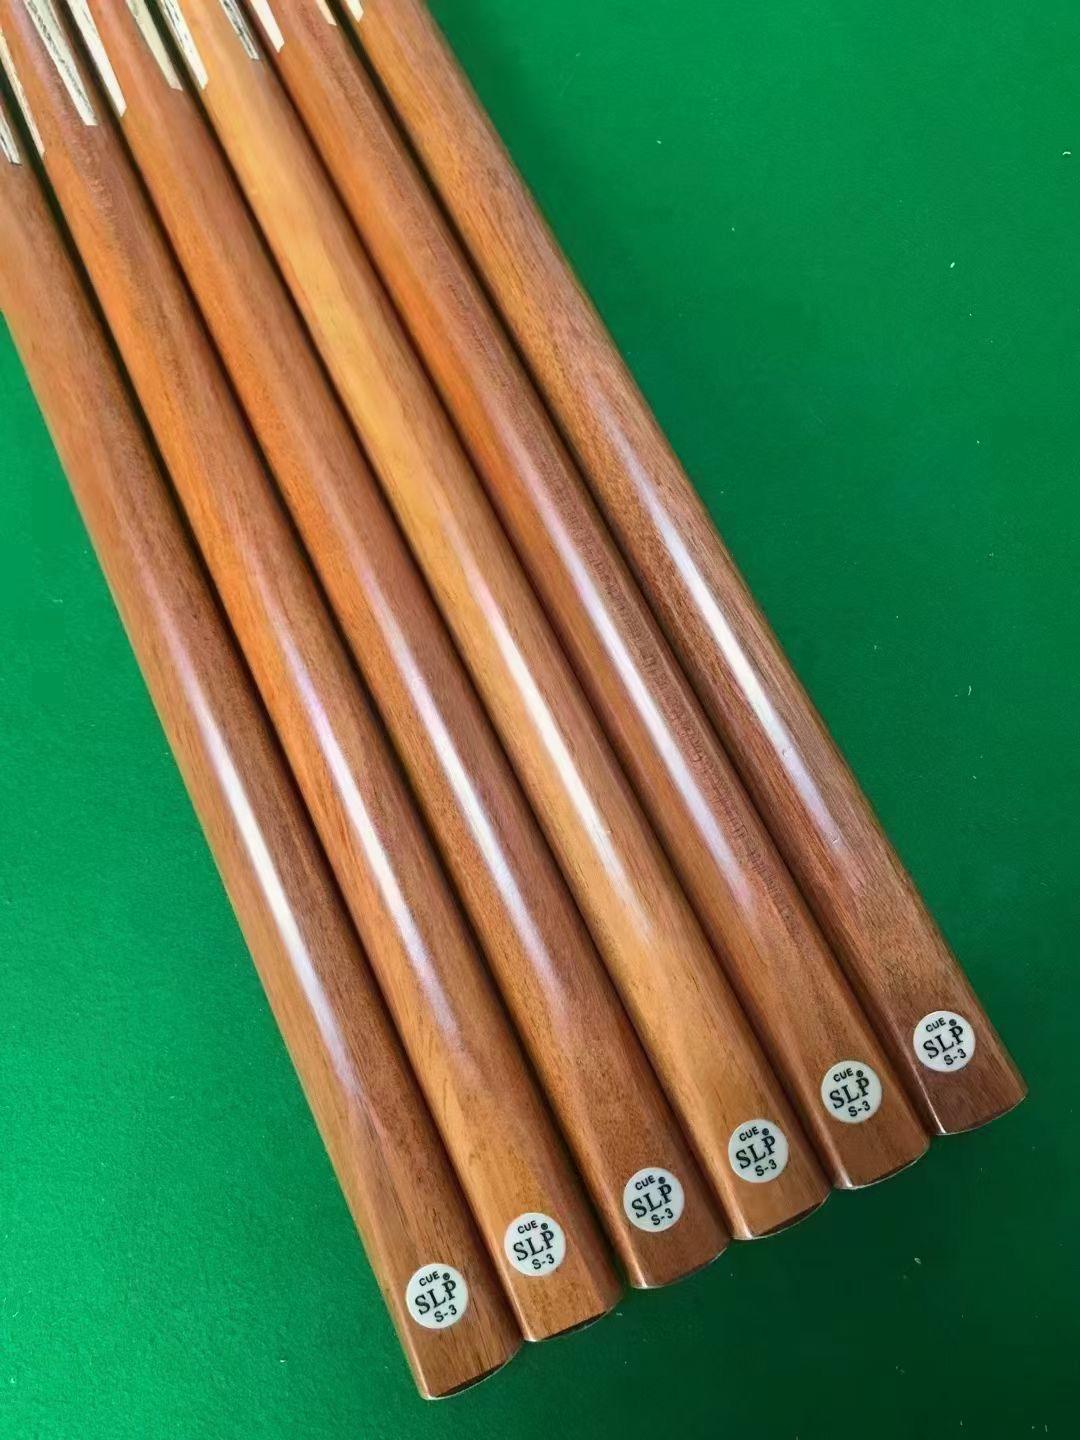 High Quality Single One Piece 57" 13mm Tip Billiard Snooker Pool House Snooker Cue Stick